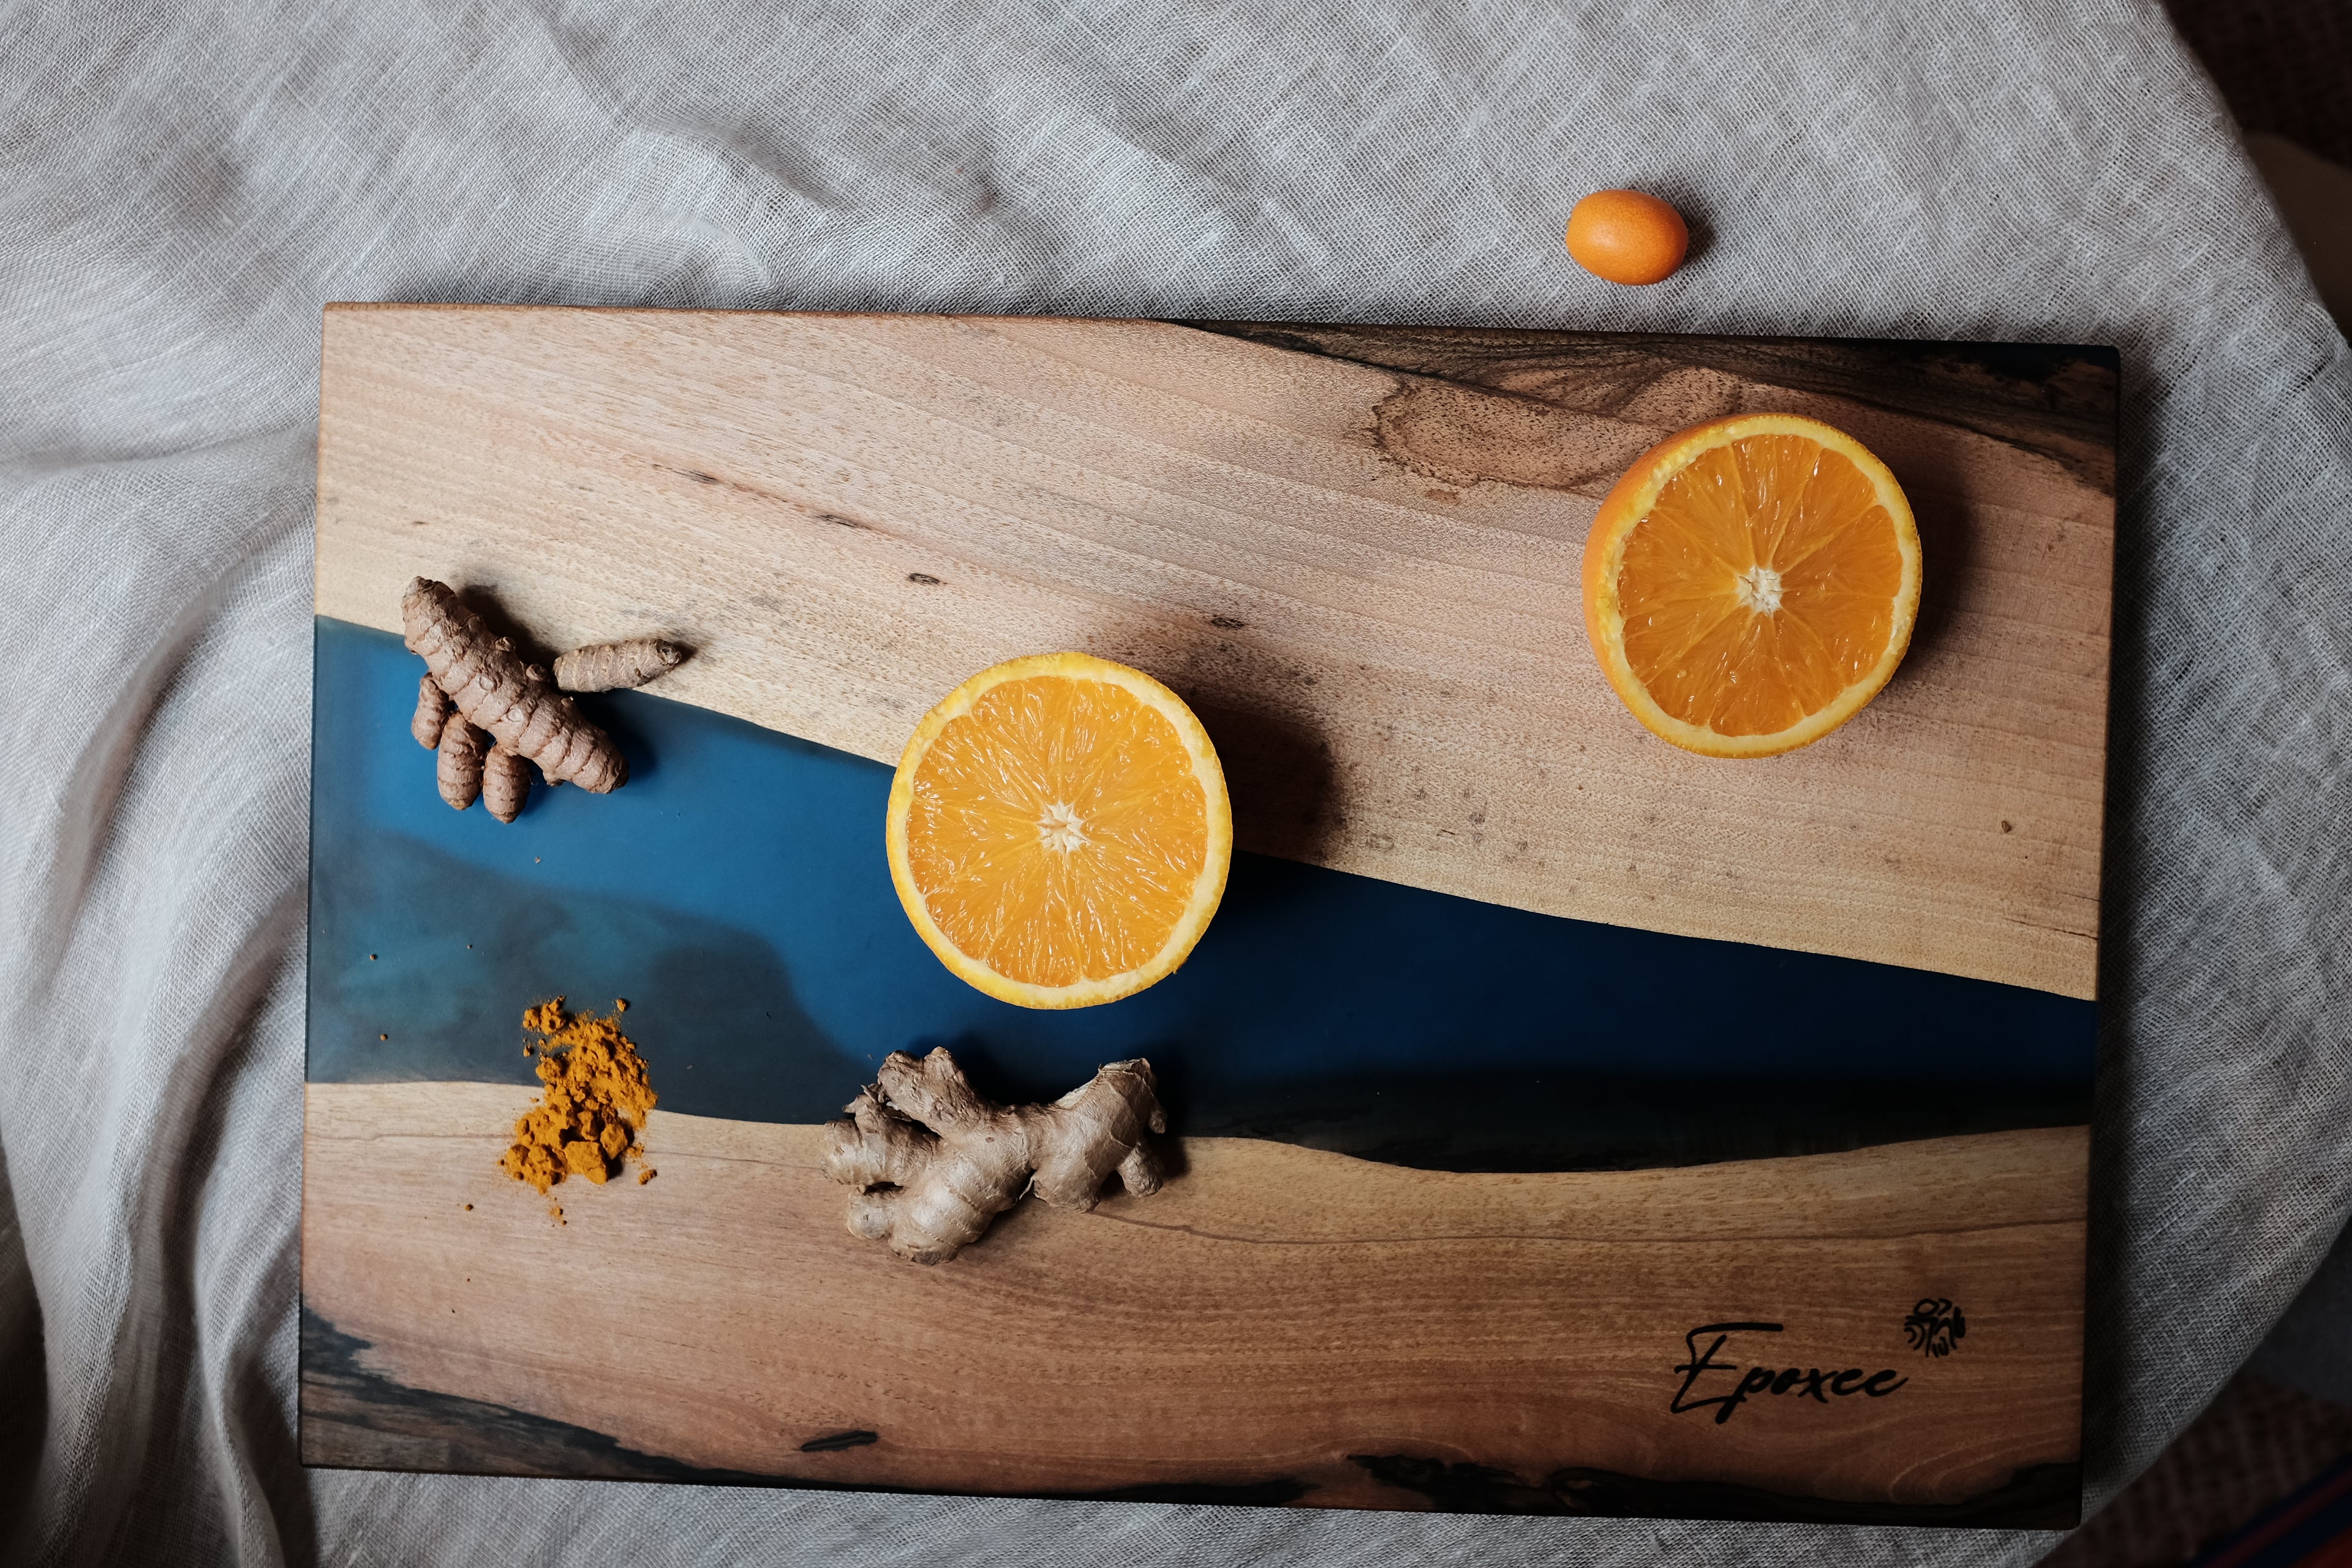 Epoxy blue wooden serving board with oranges and ginger arranged on top as decorative elements